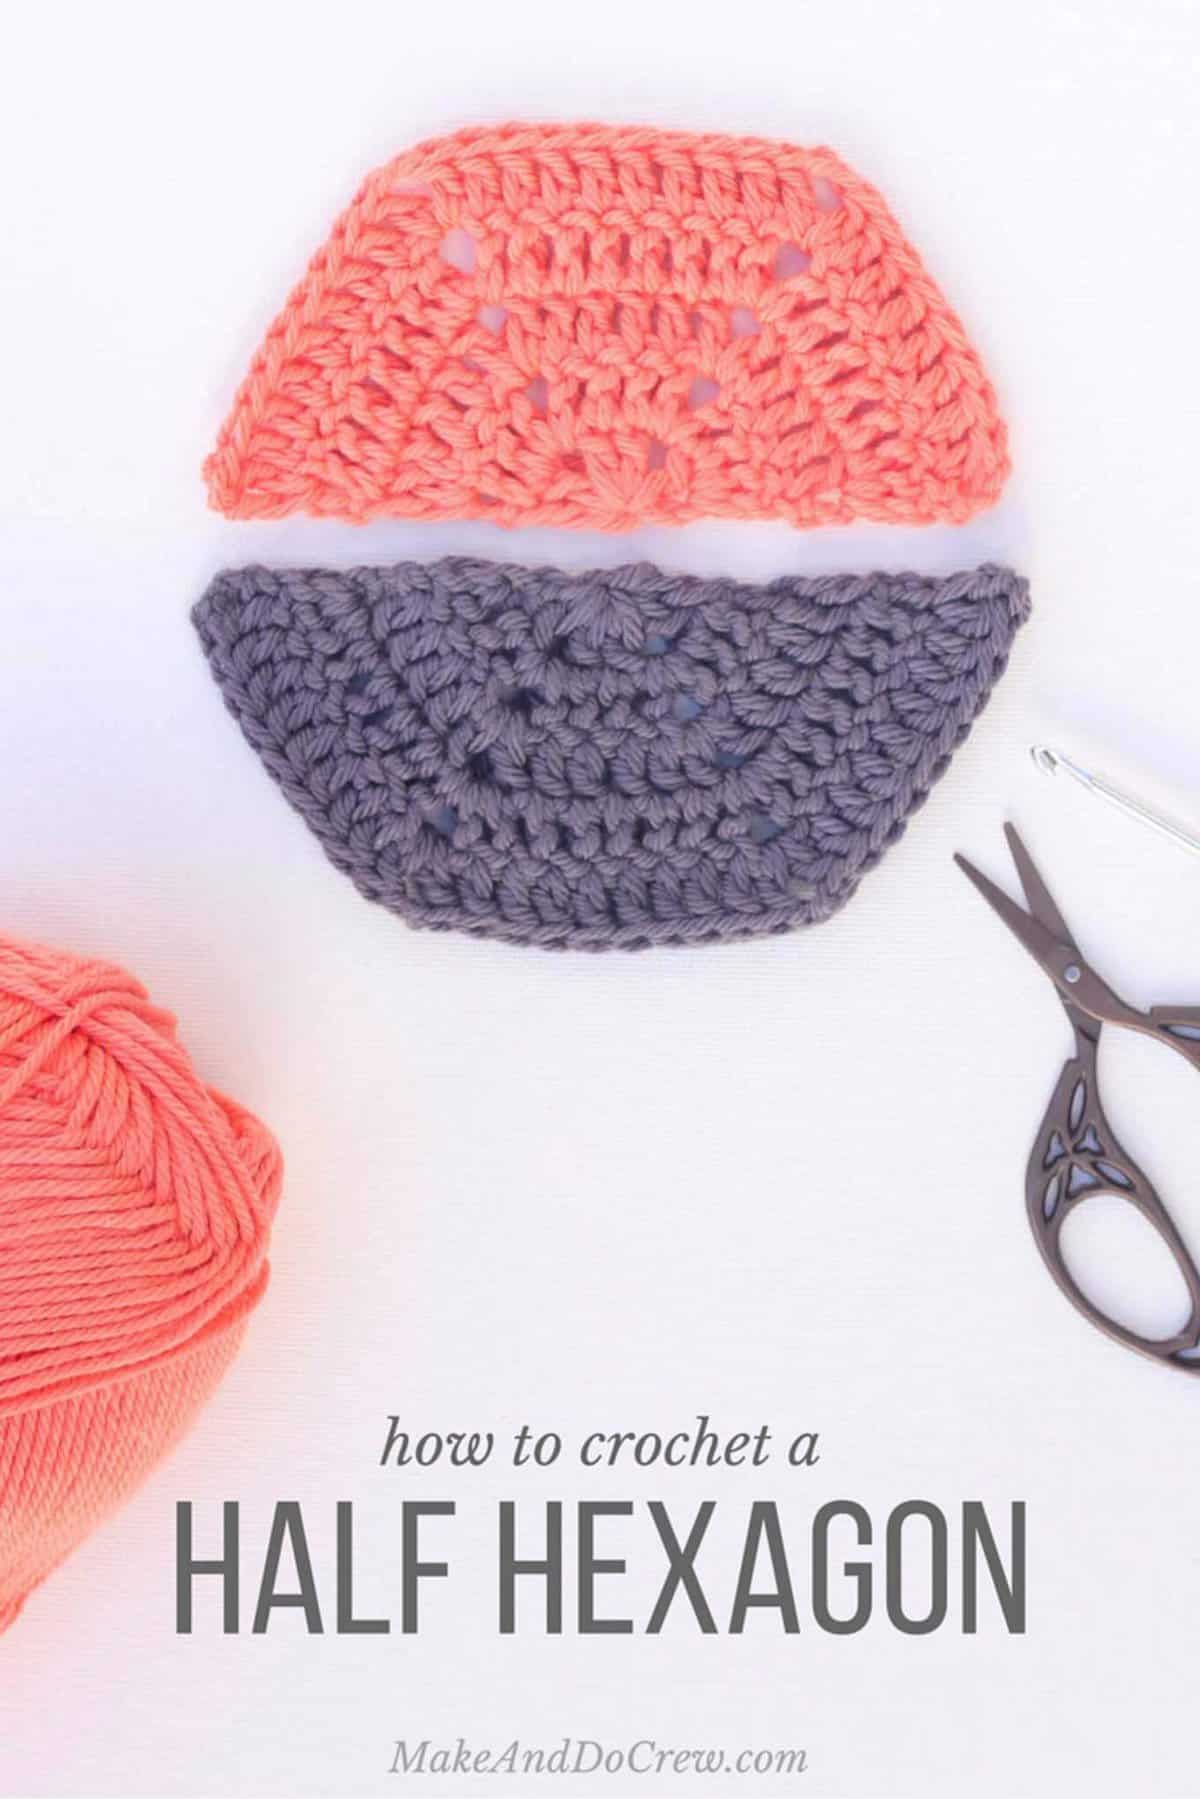 Whether you’d like to fill in the edging on a hexagon afghan or simply want to make multi-colored hexagons, this free pattern will teach you how to crochet a half hexagon and customize the size to meet your needs. 